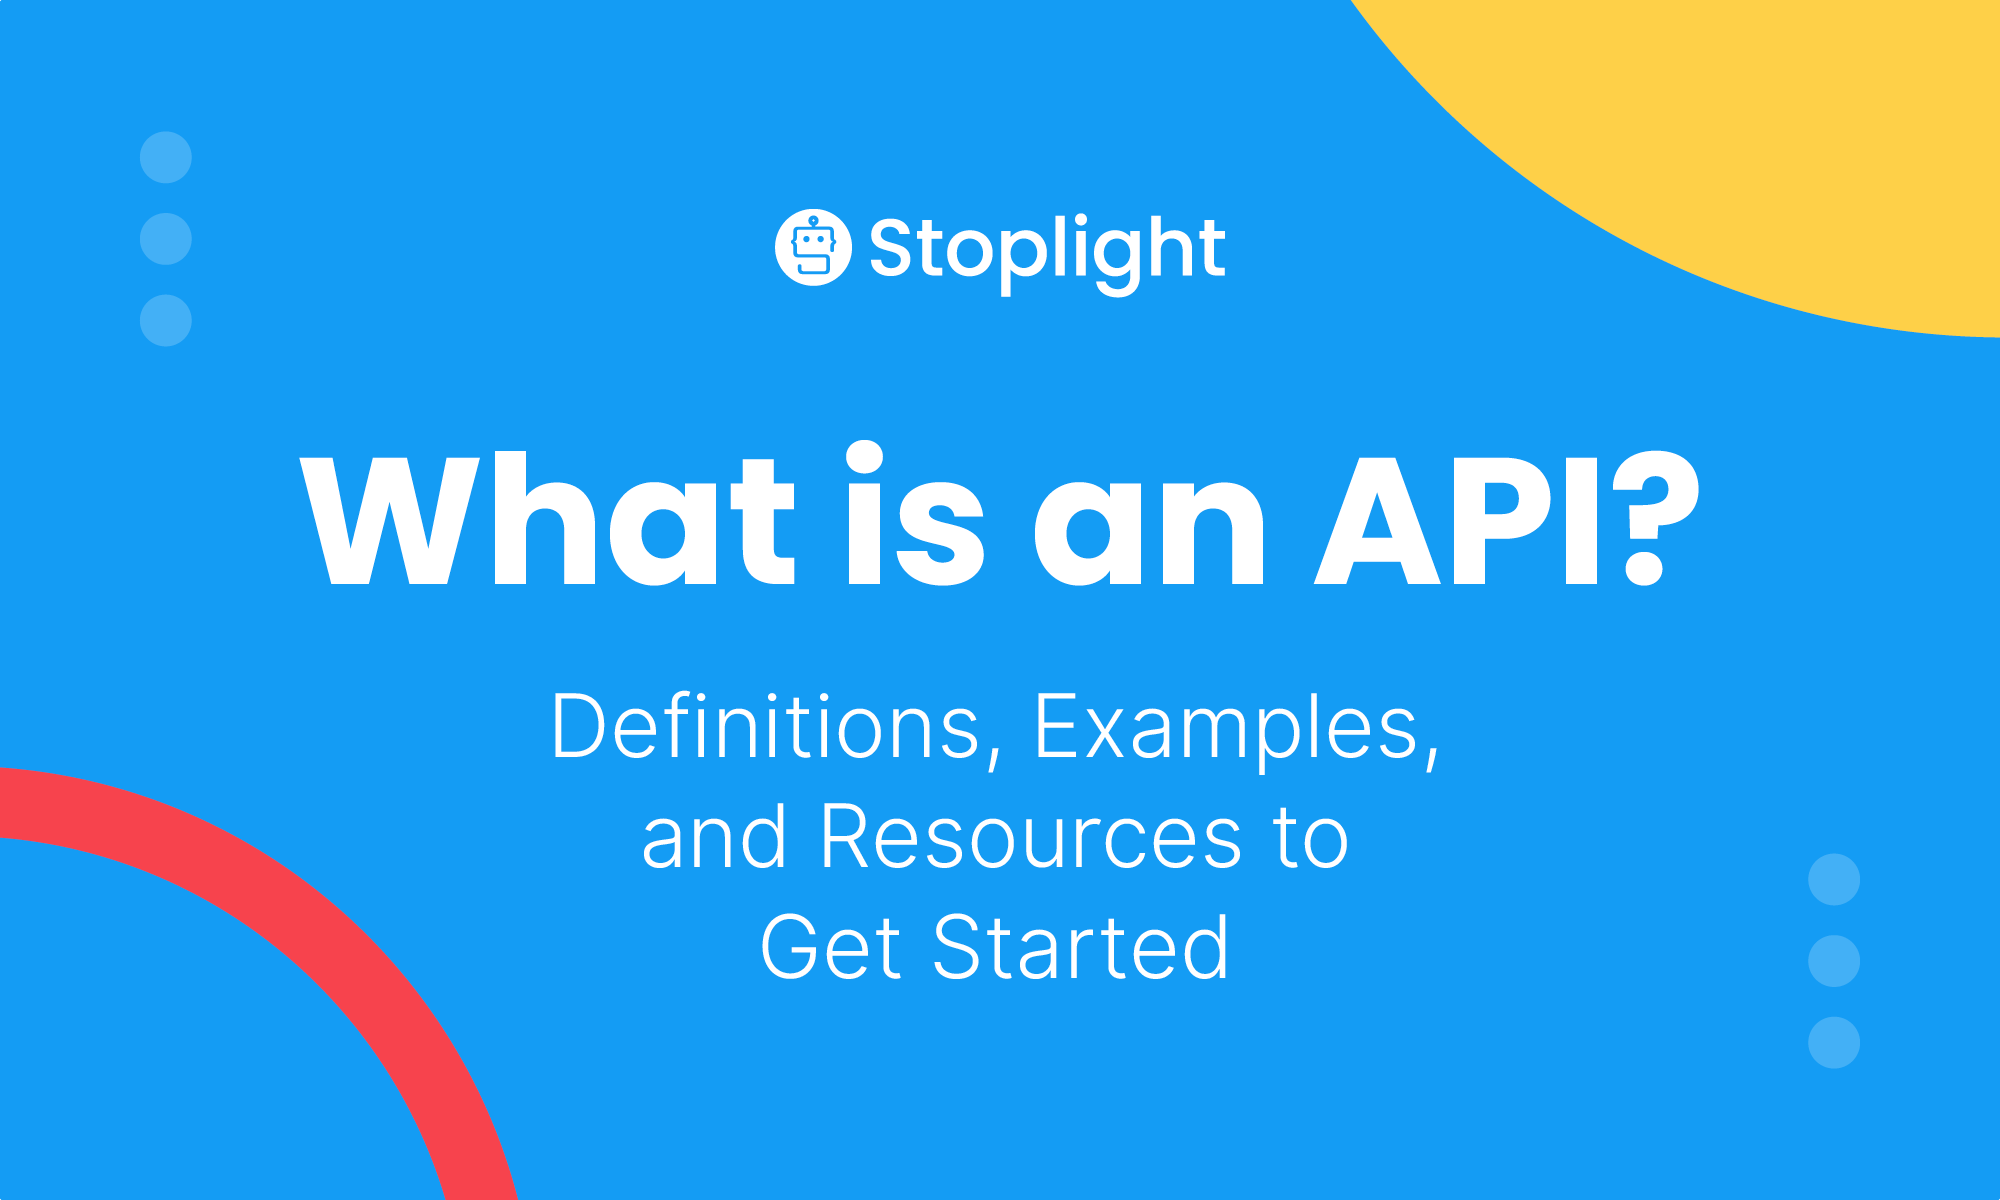 Back to Basics: What is an API?